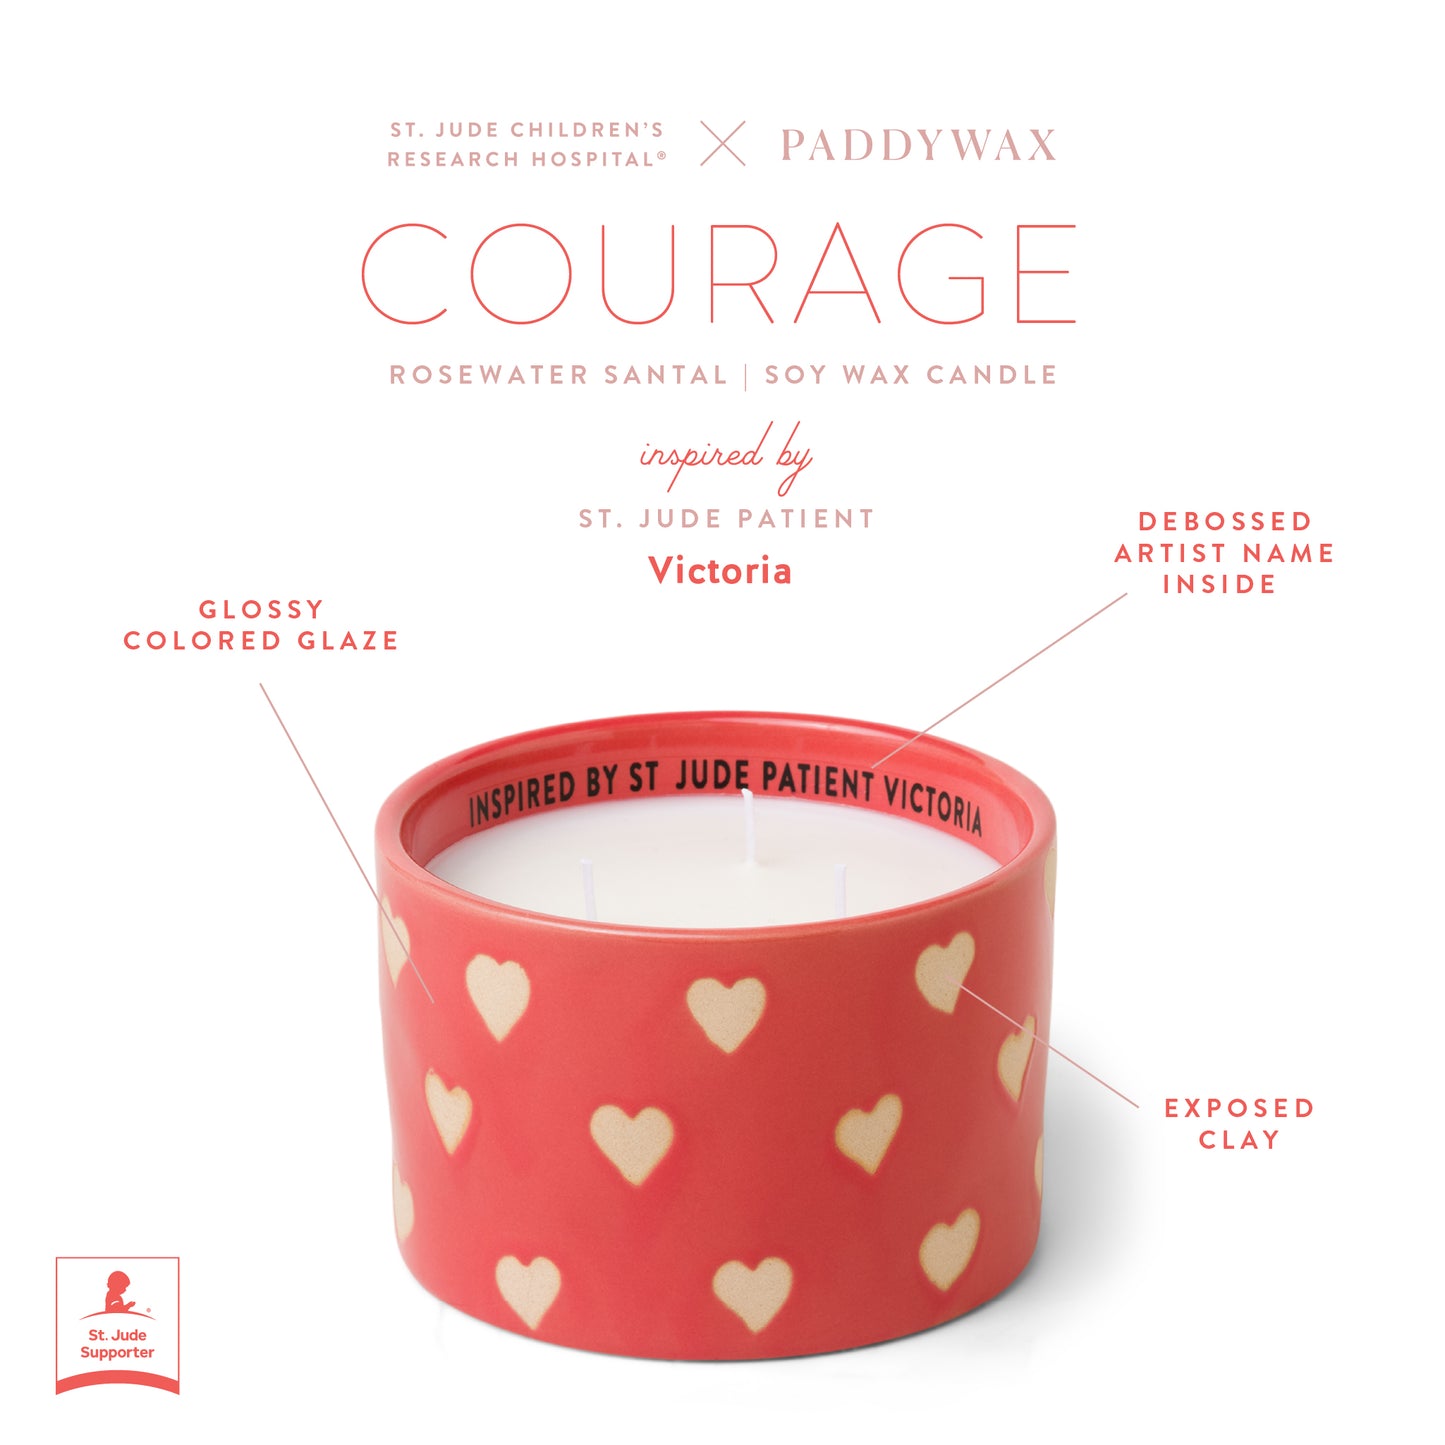 Infographic of red ceramic candle with product features text "St. Jude Children's Research Hospital ® x Paddywax Courage Rosewater Santal Soy Wax Candle inspired by St. Jude Patient Victoria. Glossy colored glazed. Debossed artist name inside. Exposed clay."